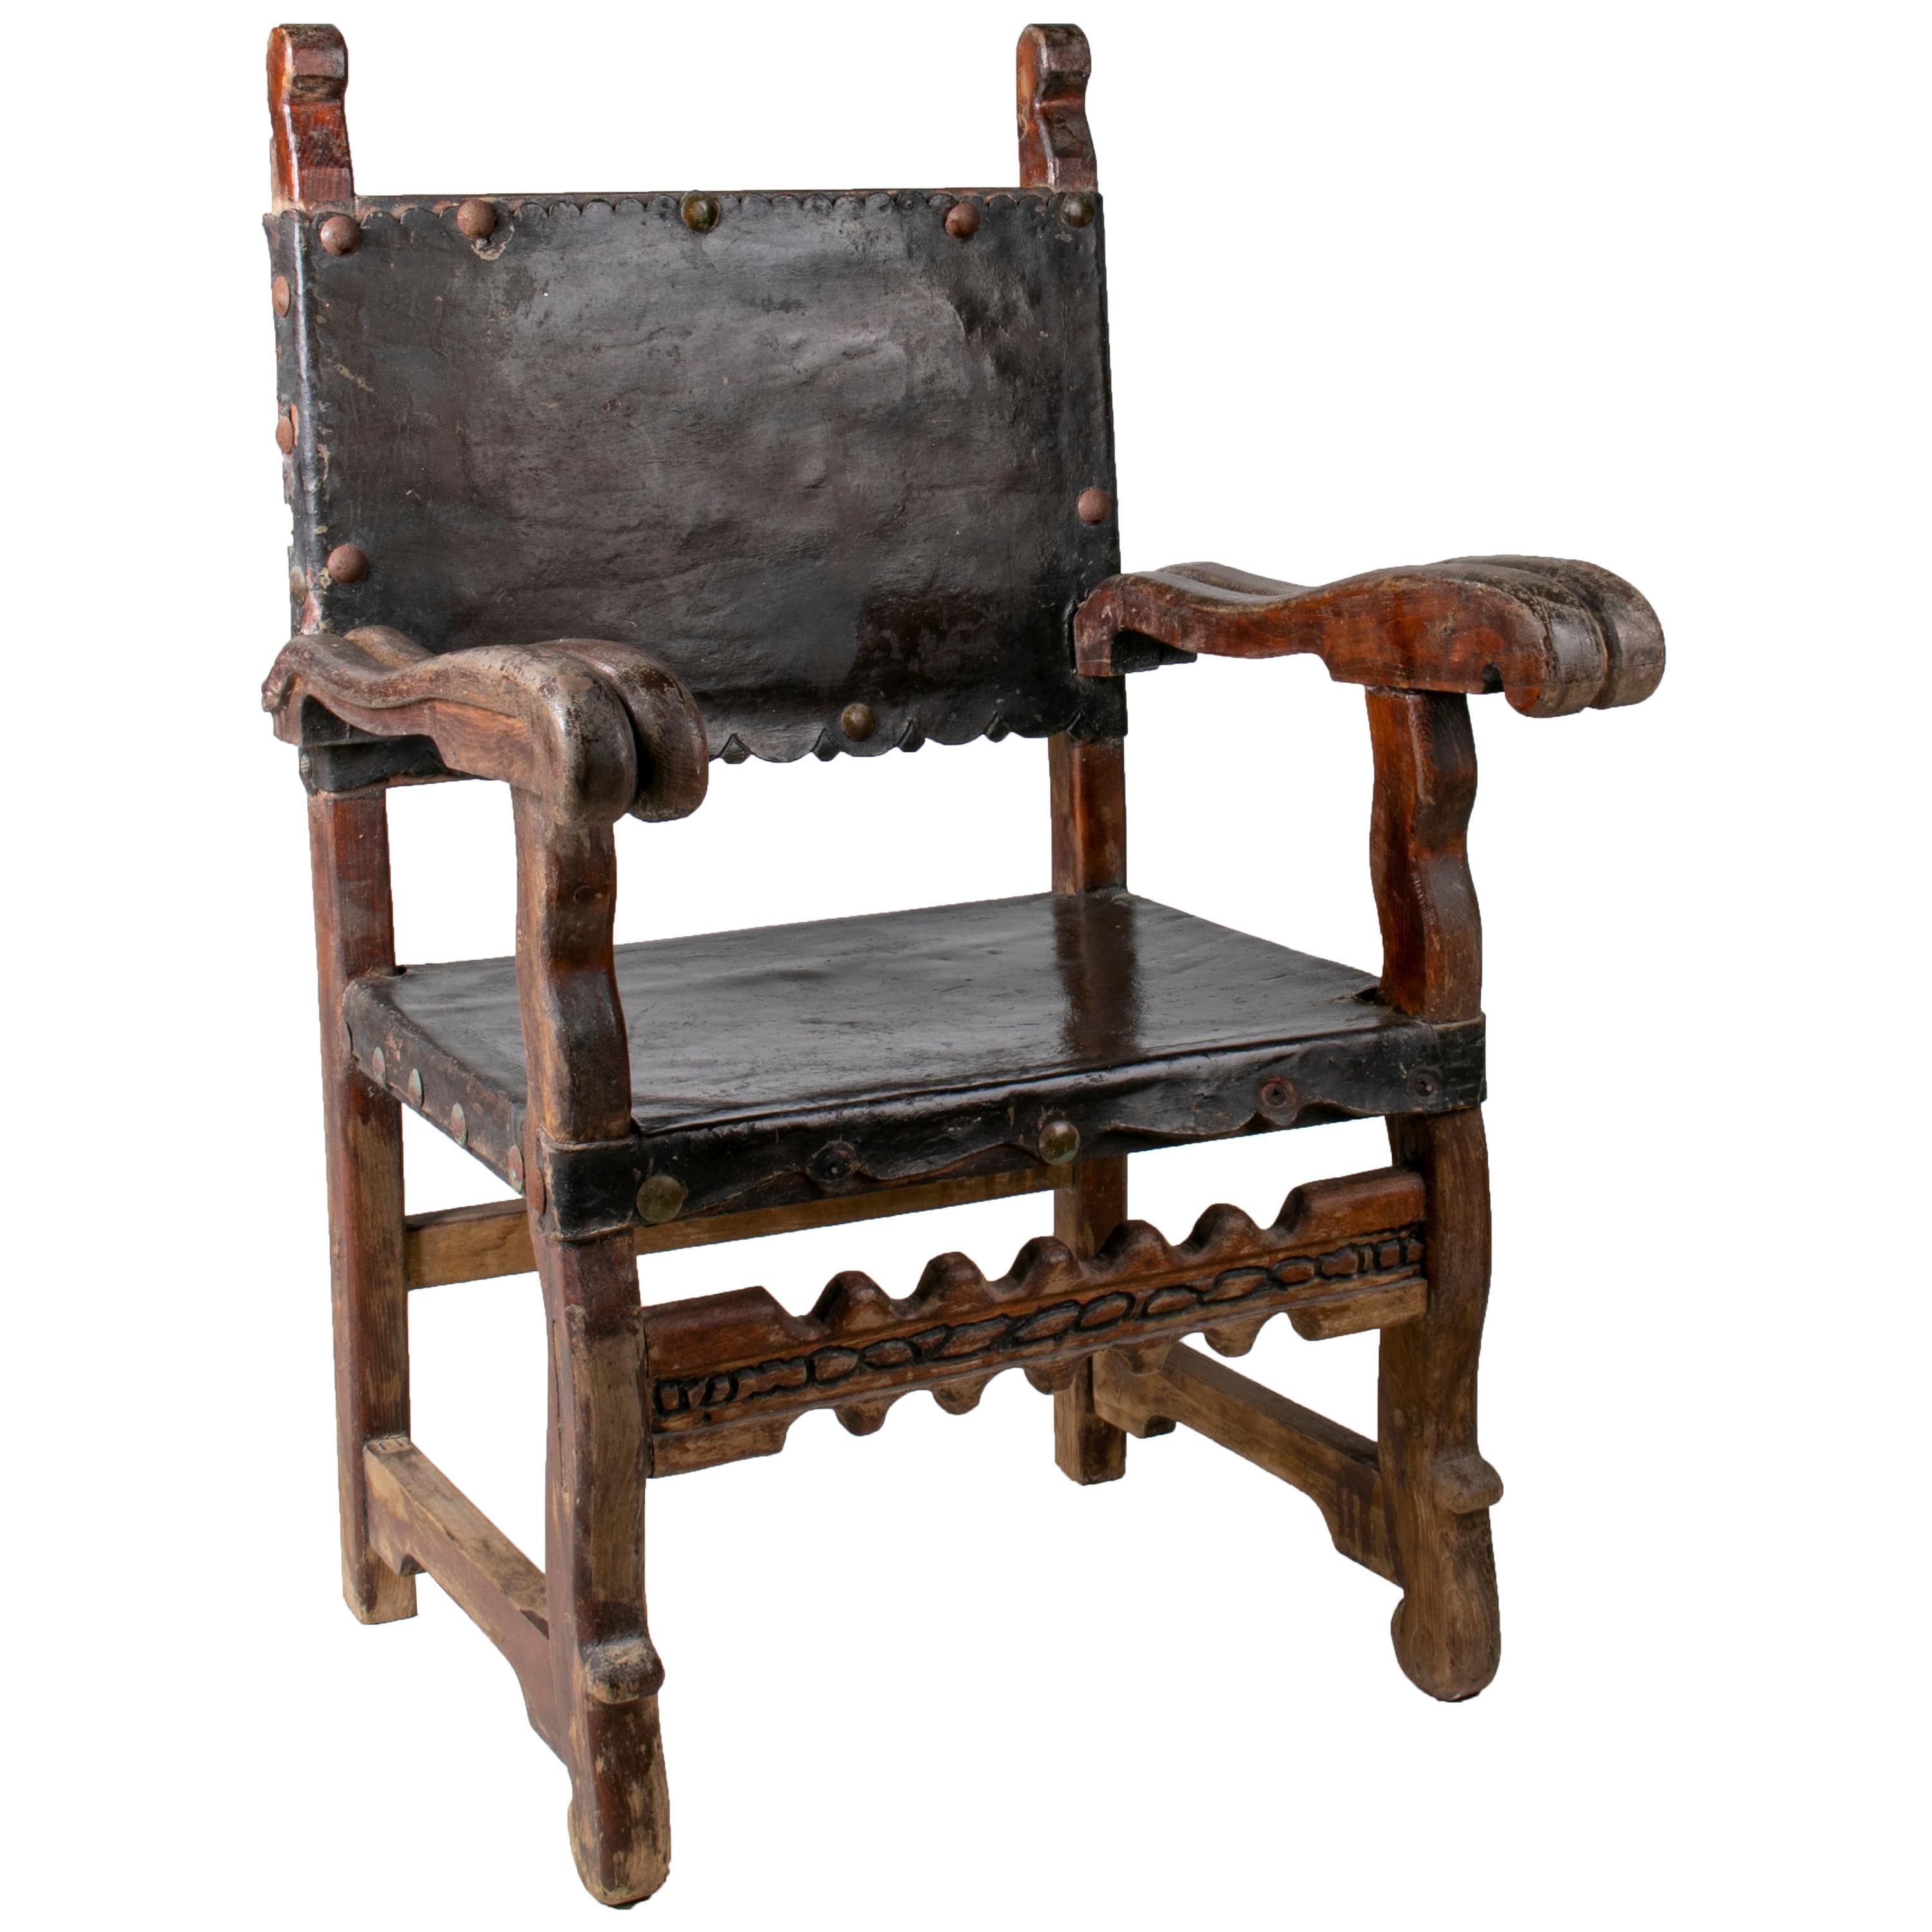 18th Century Peruvian "Frailero" Wooden Chair with Leather Seat and Back